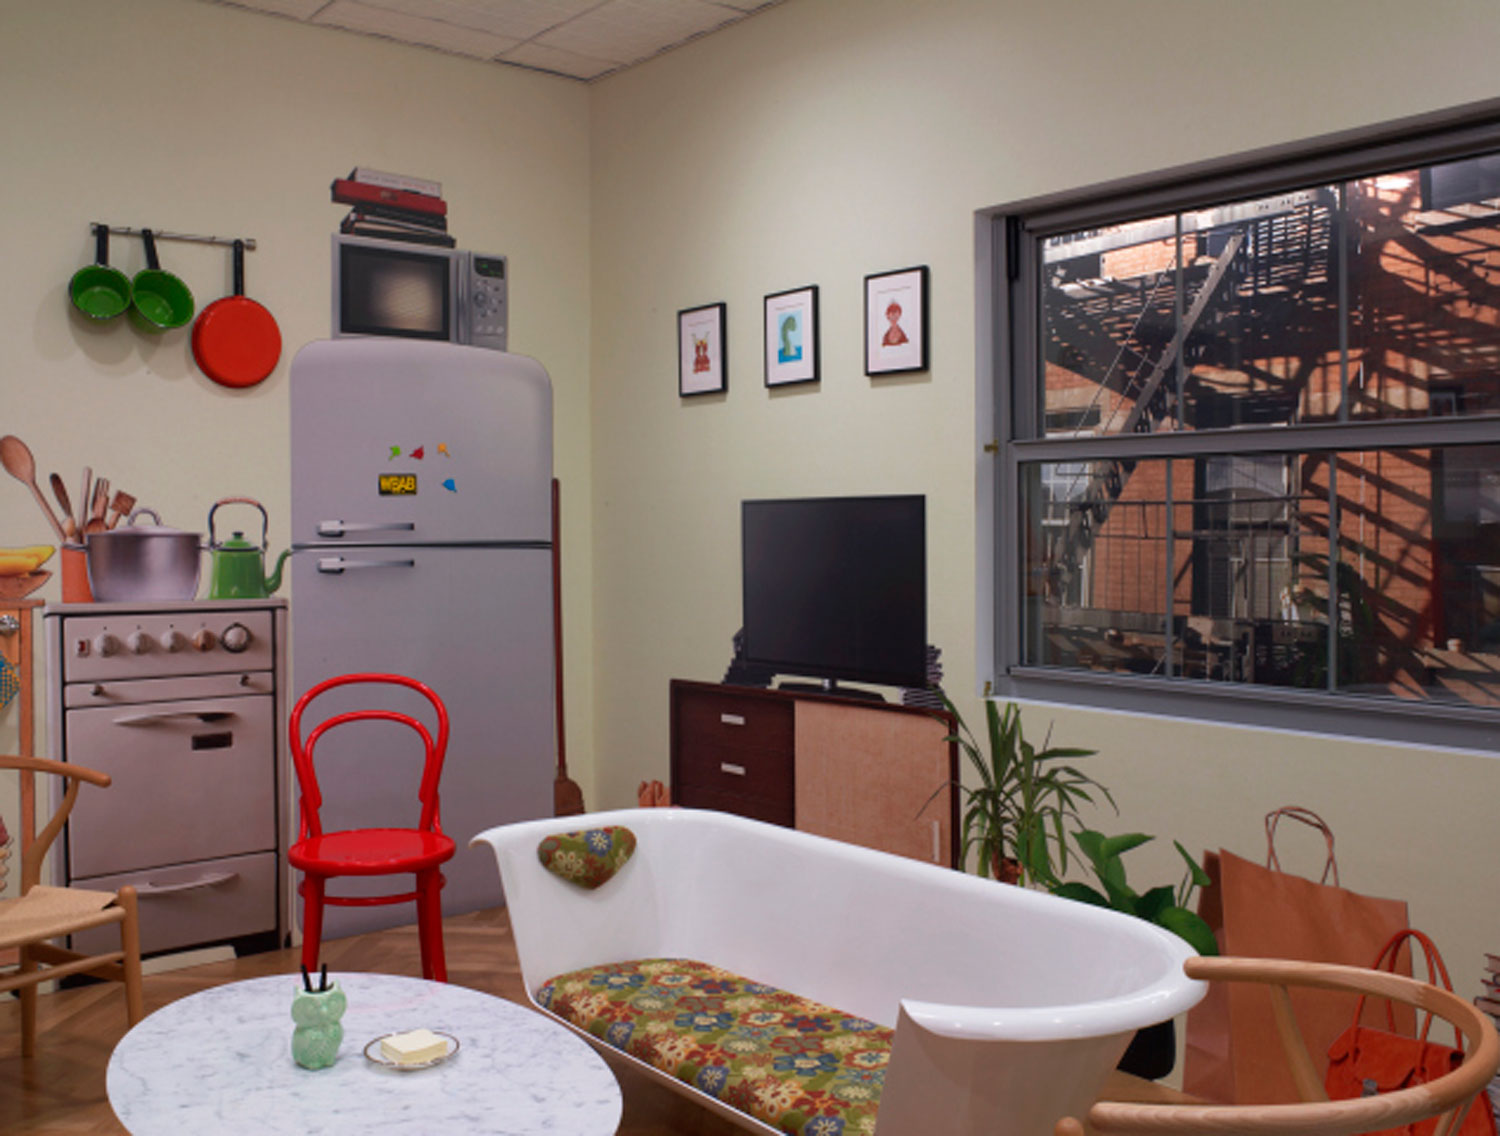 Google's apartment themed conference room for those looking to “work from home” at work.